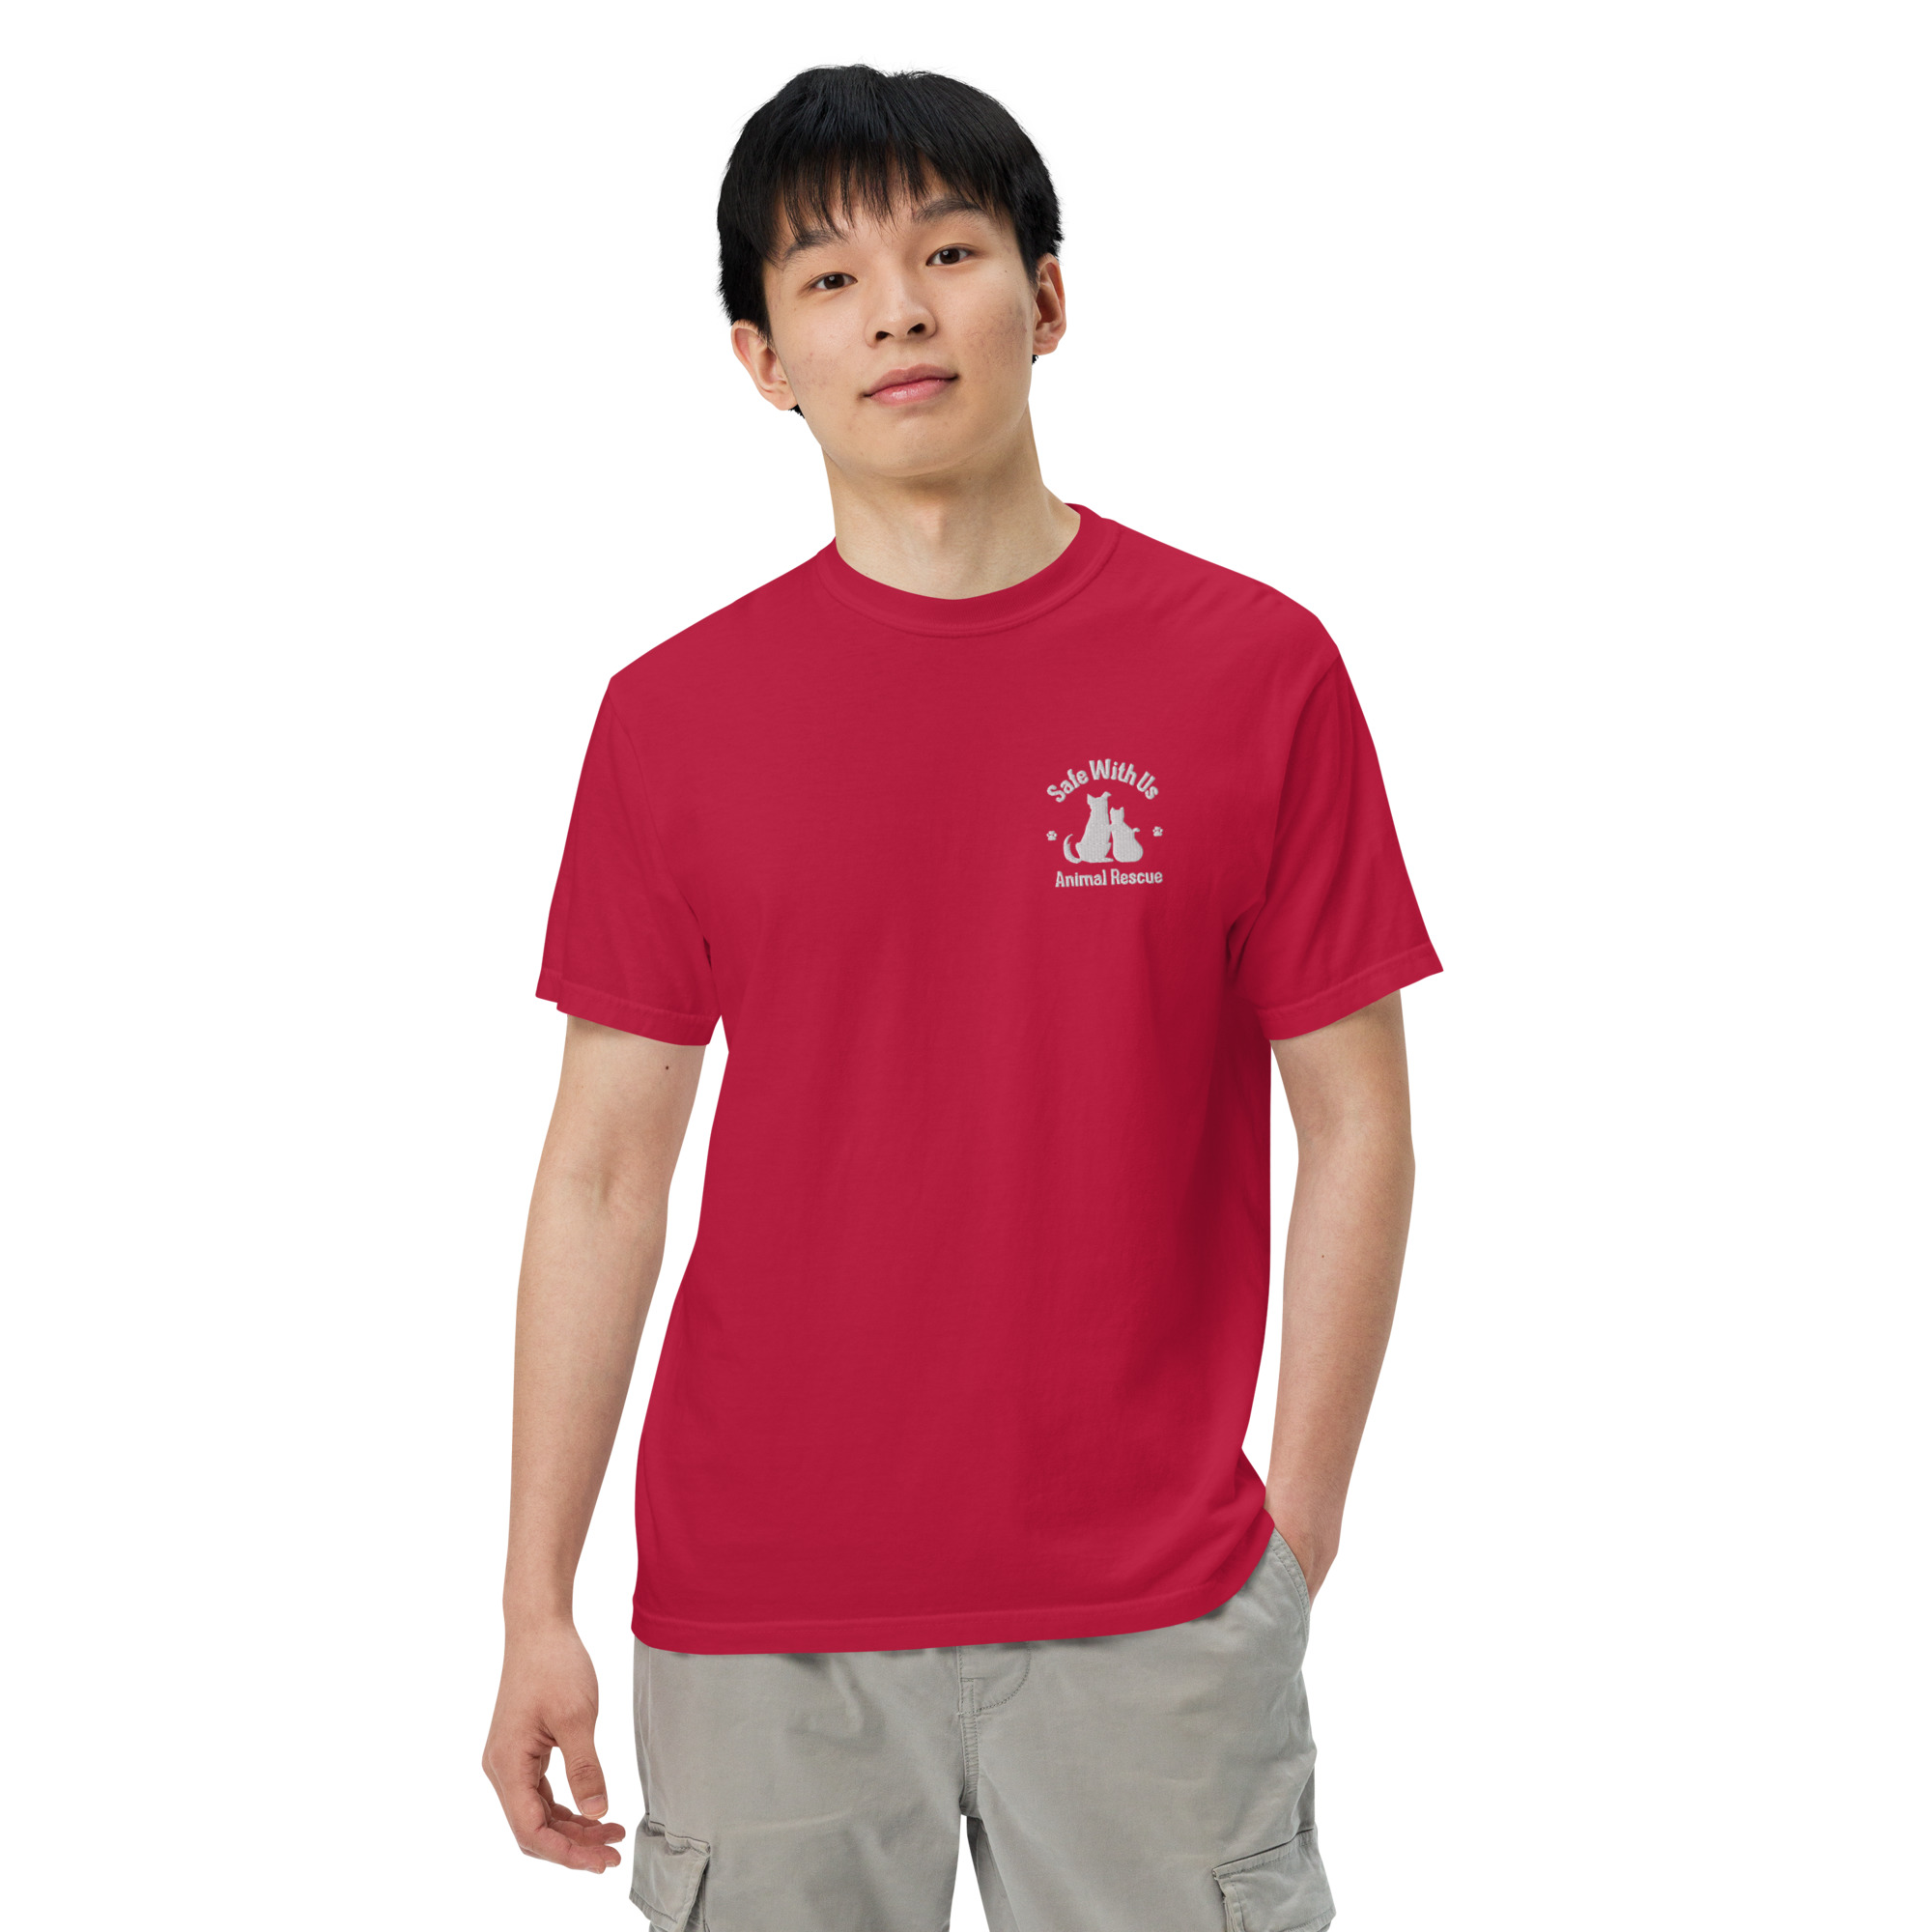 mens-garment-dyed-heavyweight-t-shirt-red-front-2-641520bf848fe.jpg